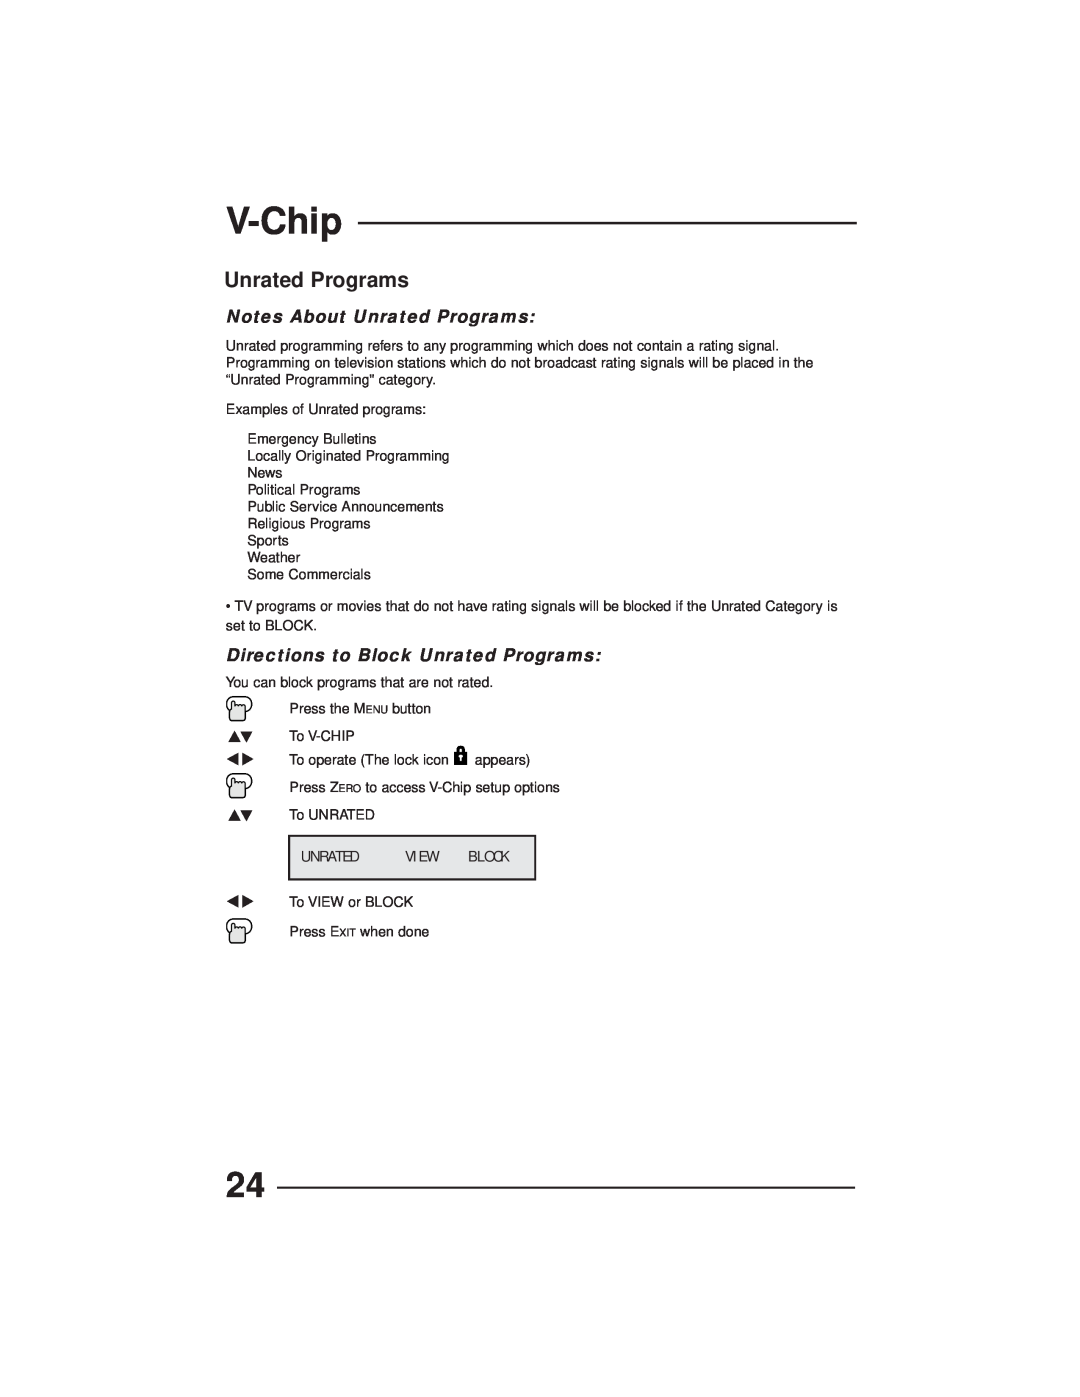 JVC AV-27GFH manual V-Chip, Notes About Unrated Programs, Directions to Block Unrated Programs, View 